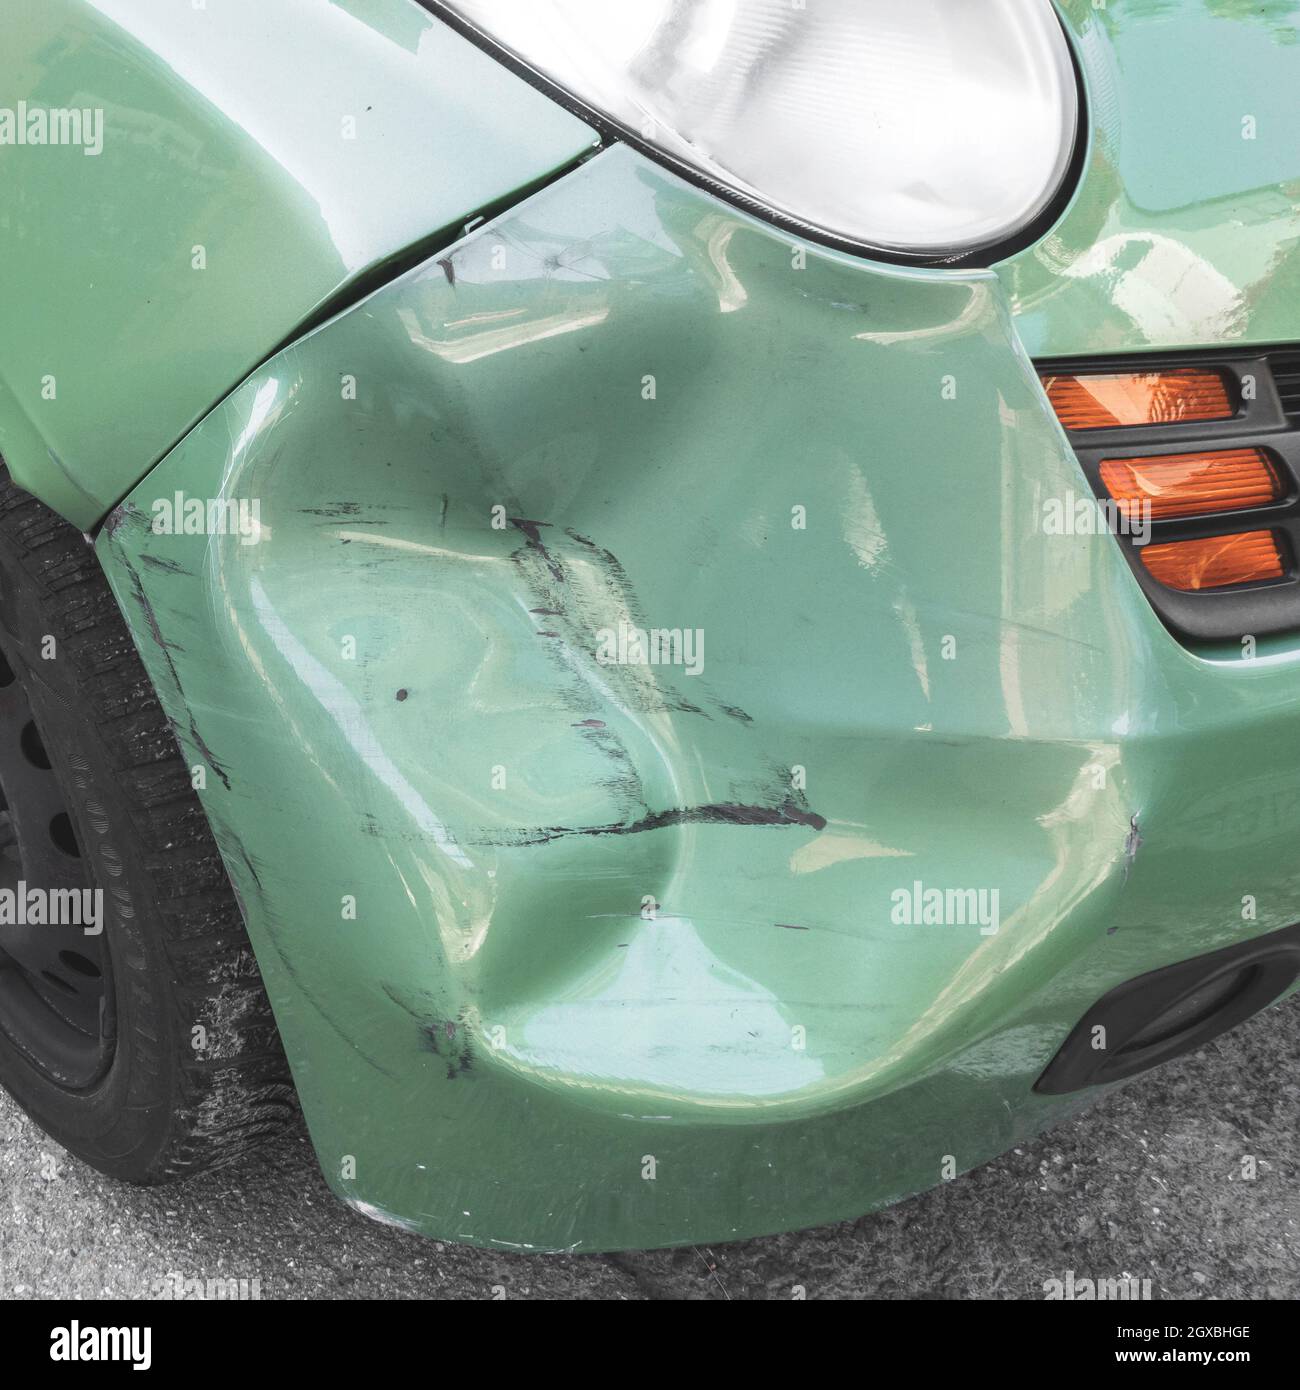 Green dented car. Side body of car was damaged by accident in traffic. Close-up. Stock Photo